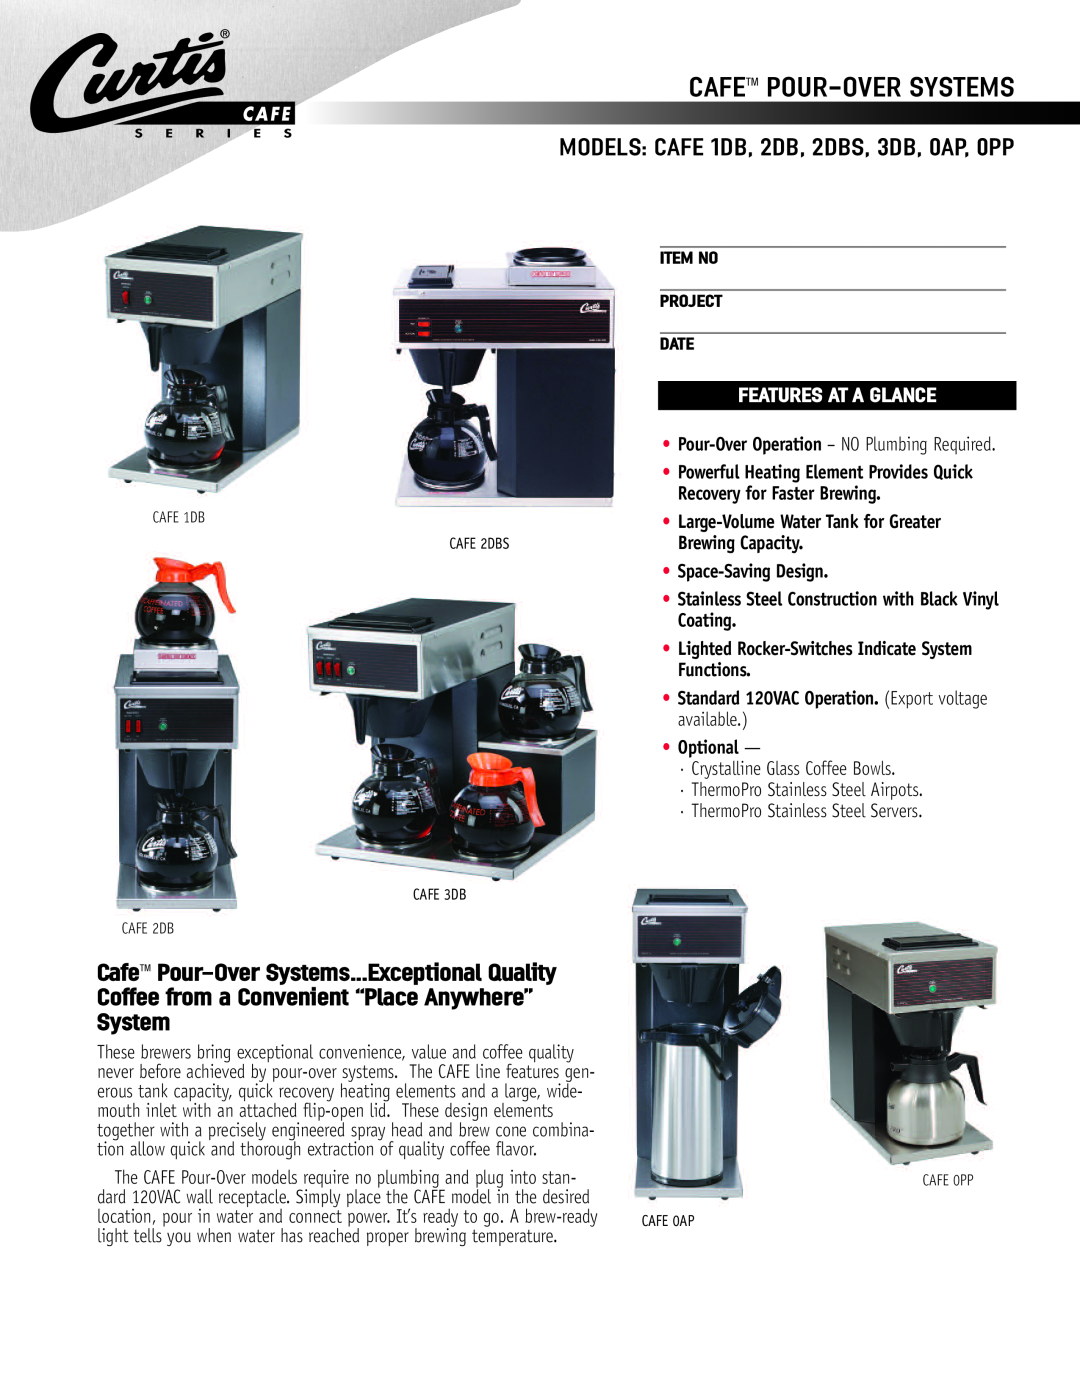 Wibur Curtis Company CAFE 2DB manual Cafe Pour-Oversystems, MODELS CAFE 1DB, 2DB, 2DBS, 3DB, 0AP, 0PP, Space-SavingDesign 